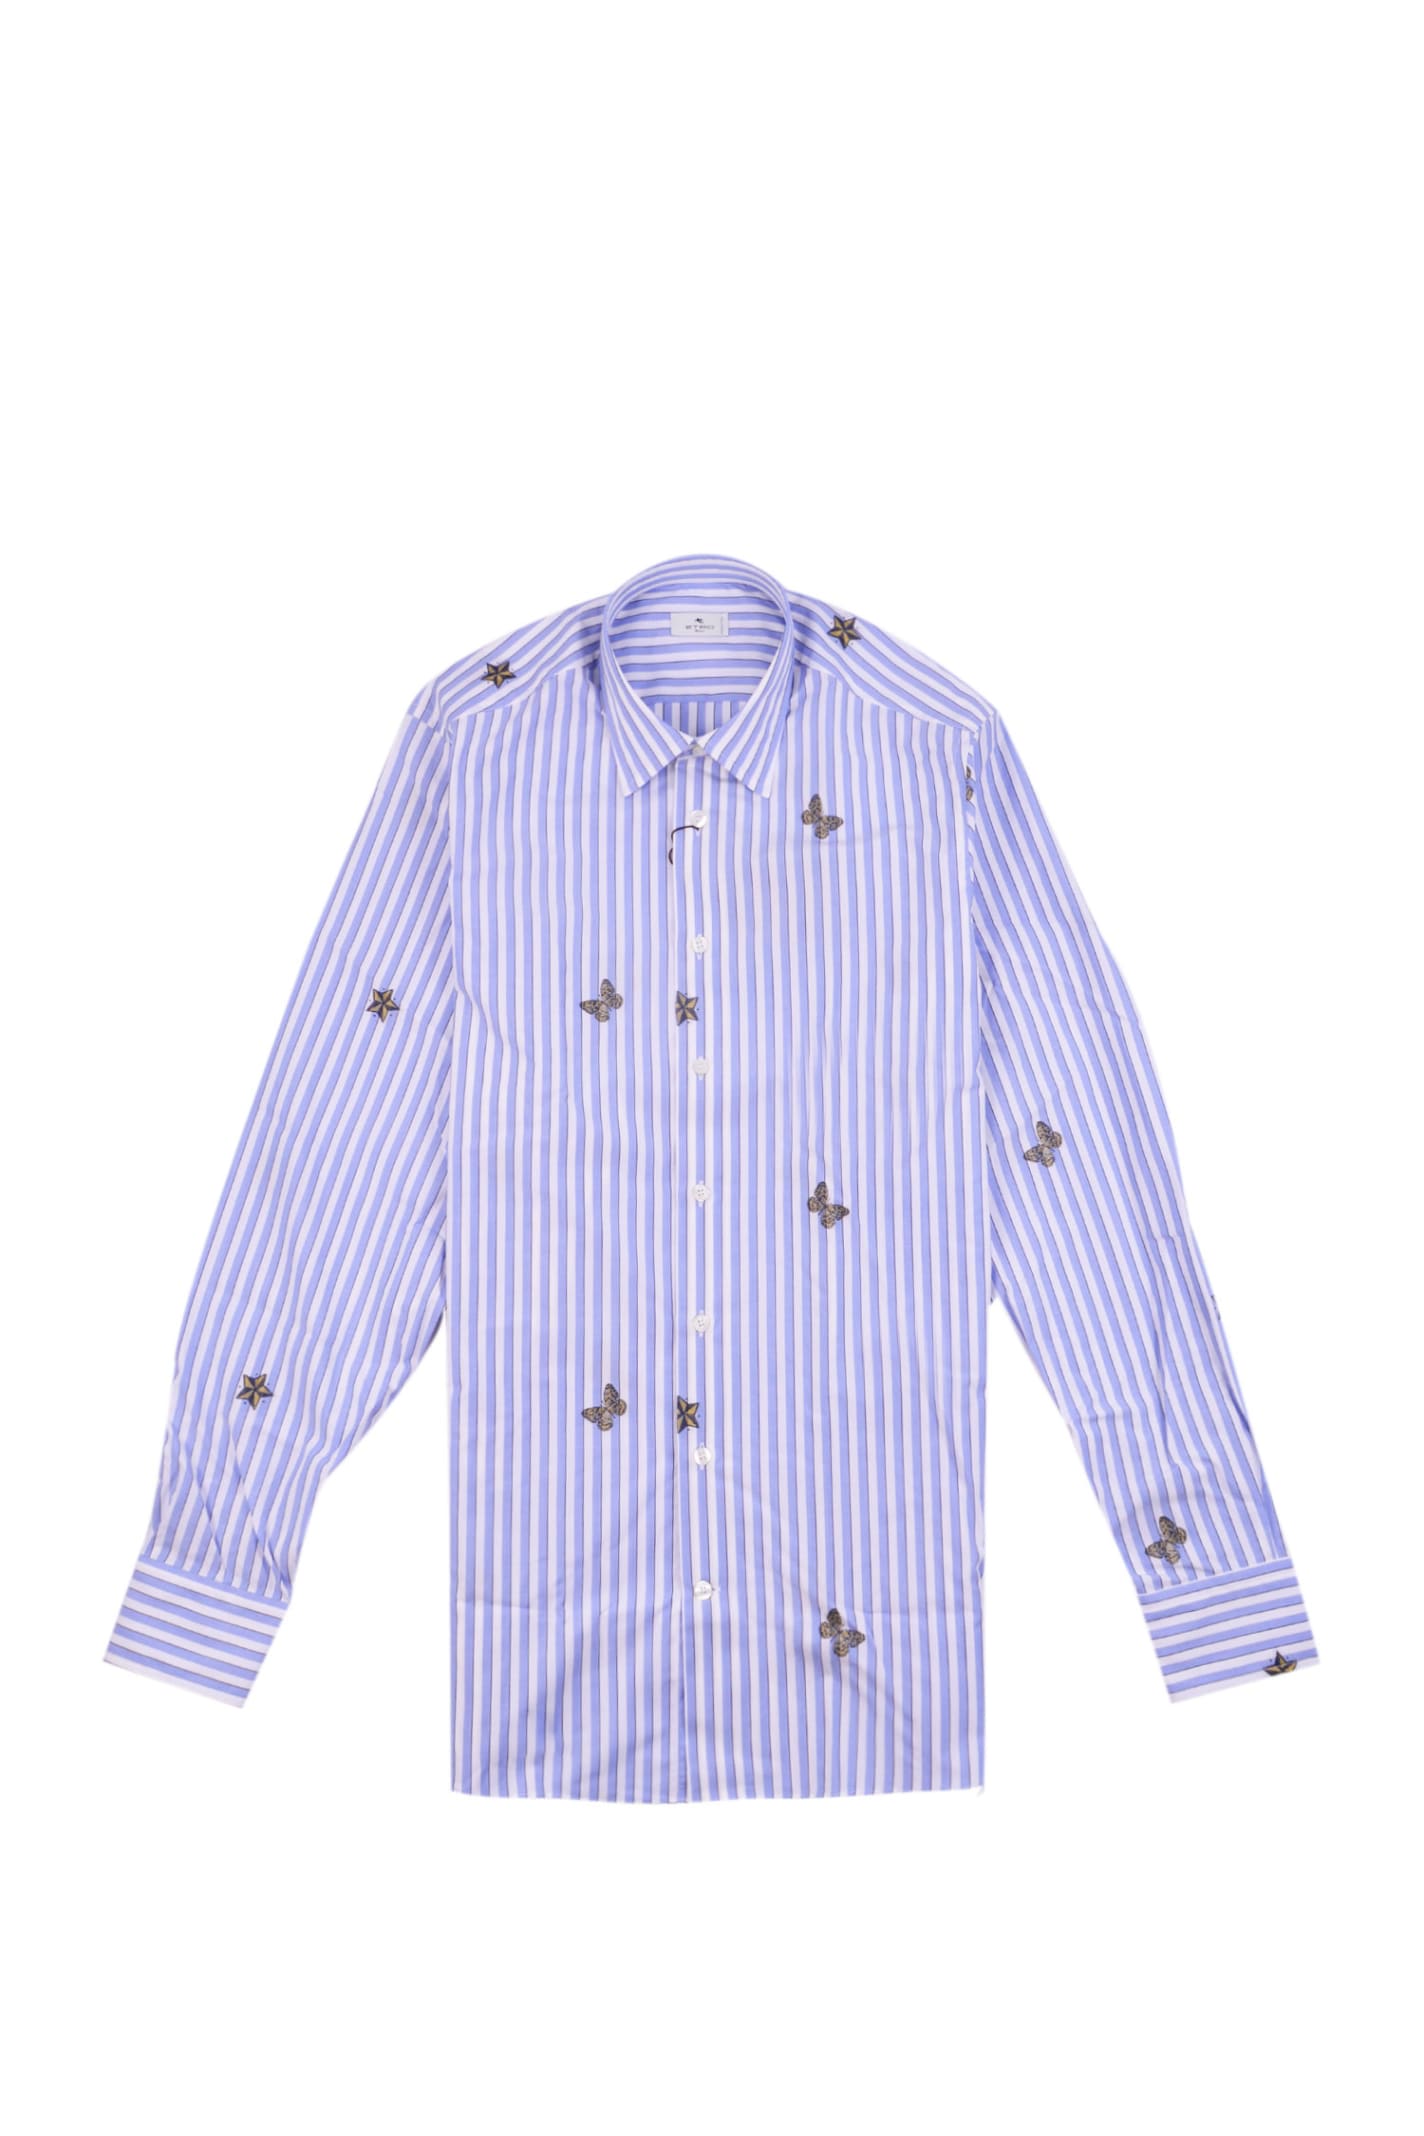 Etro Striped Shirt With All-over Butterflies